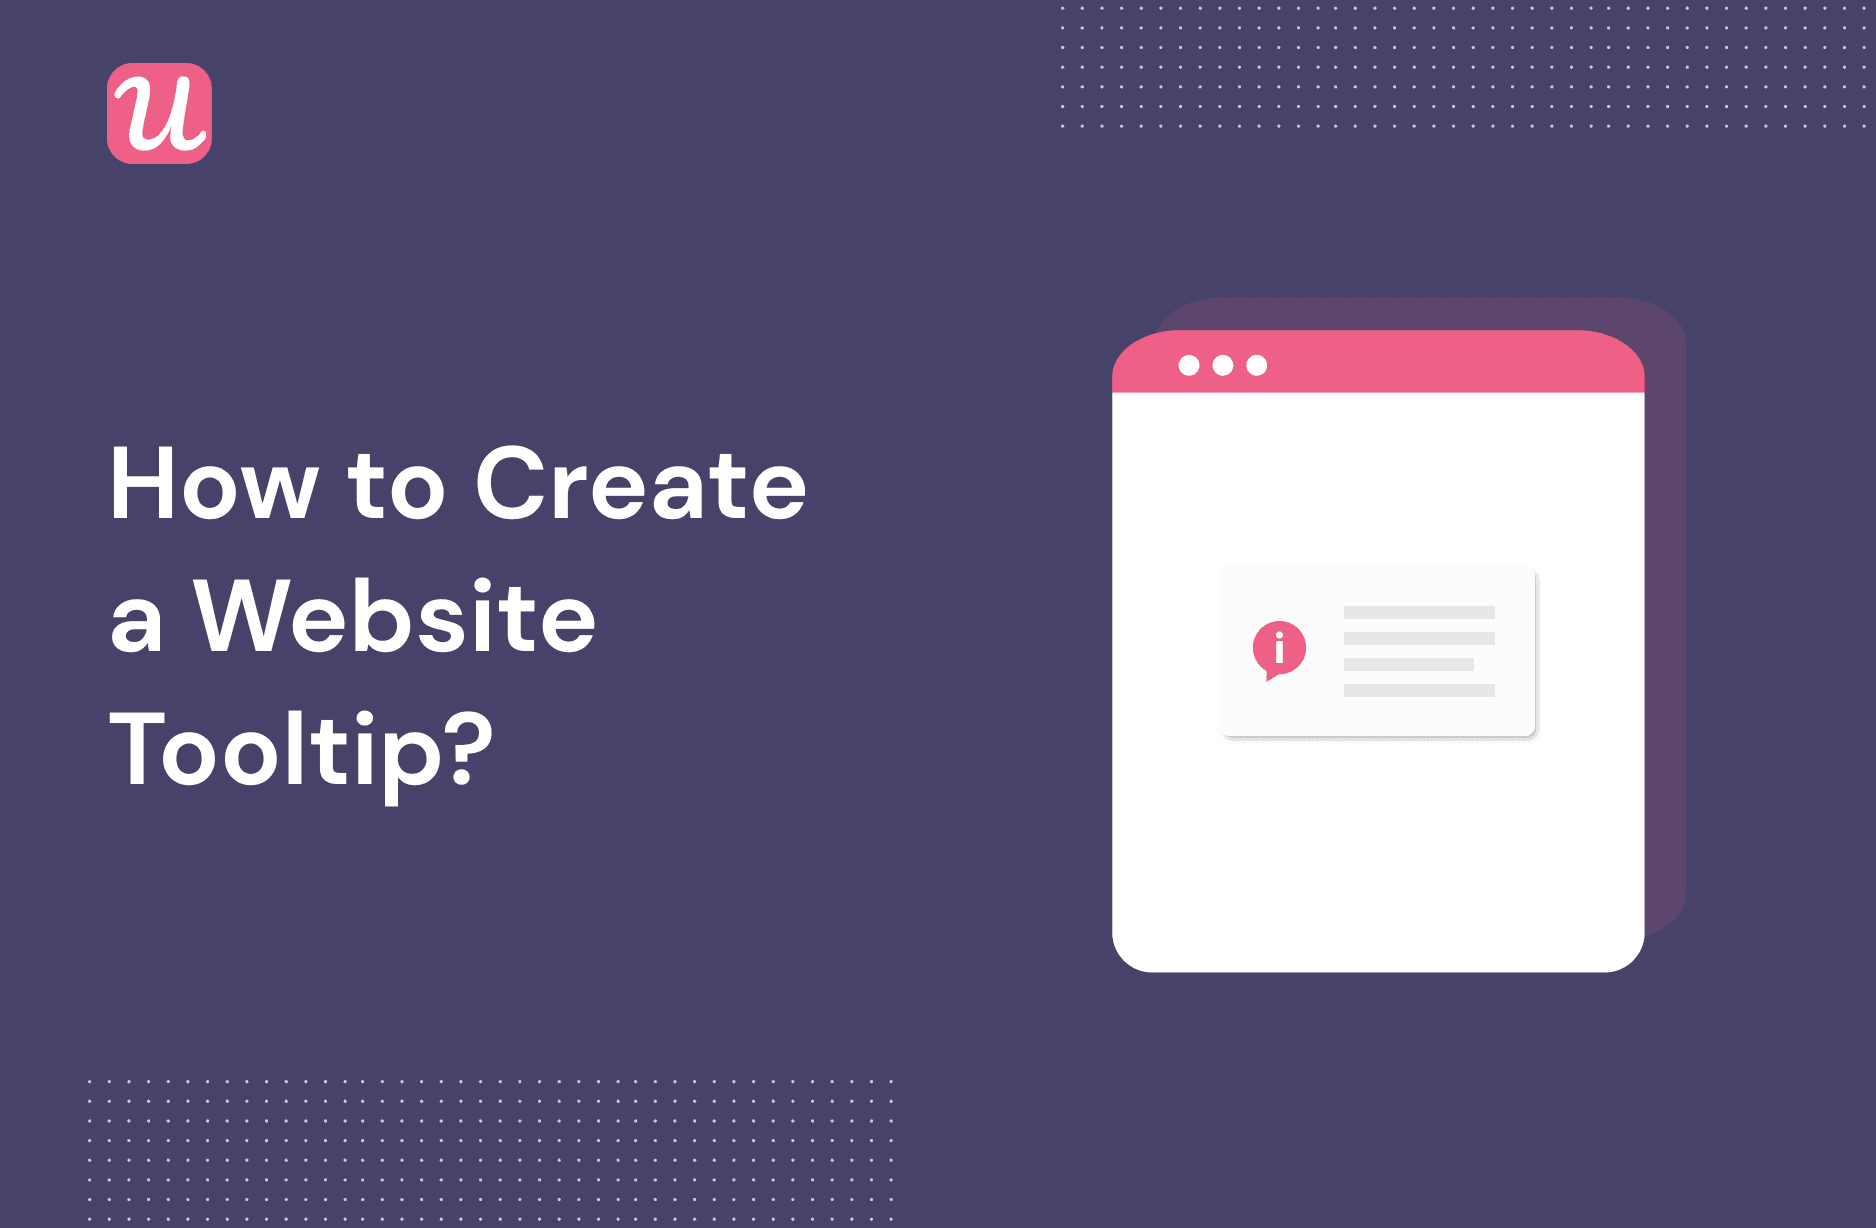 How to Create a Website Tooltip